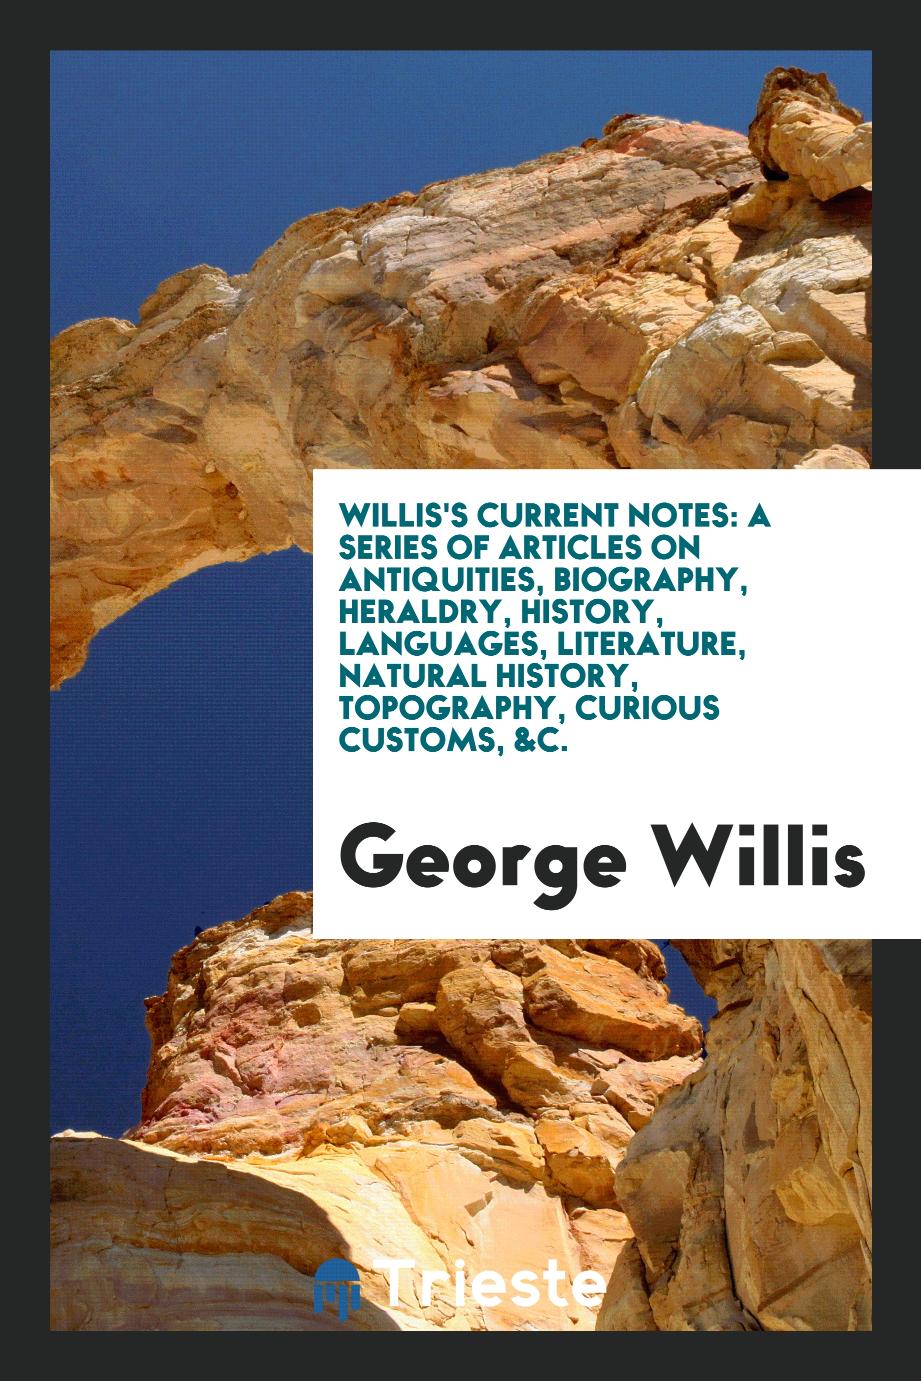 Willis's Current Notes: A Series of Articles on Antiquities, Biography, Heraldry, History, Languages, Literature, Natural History, Topography, Curious Customs, &C.